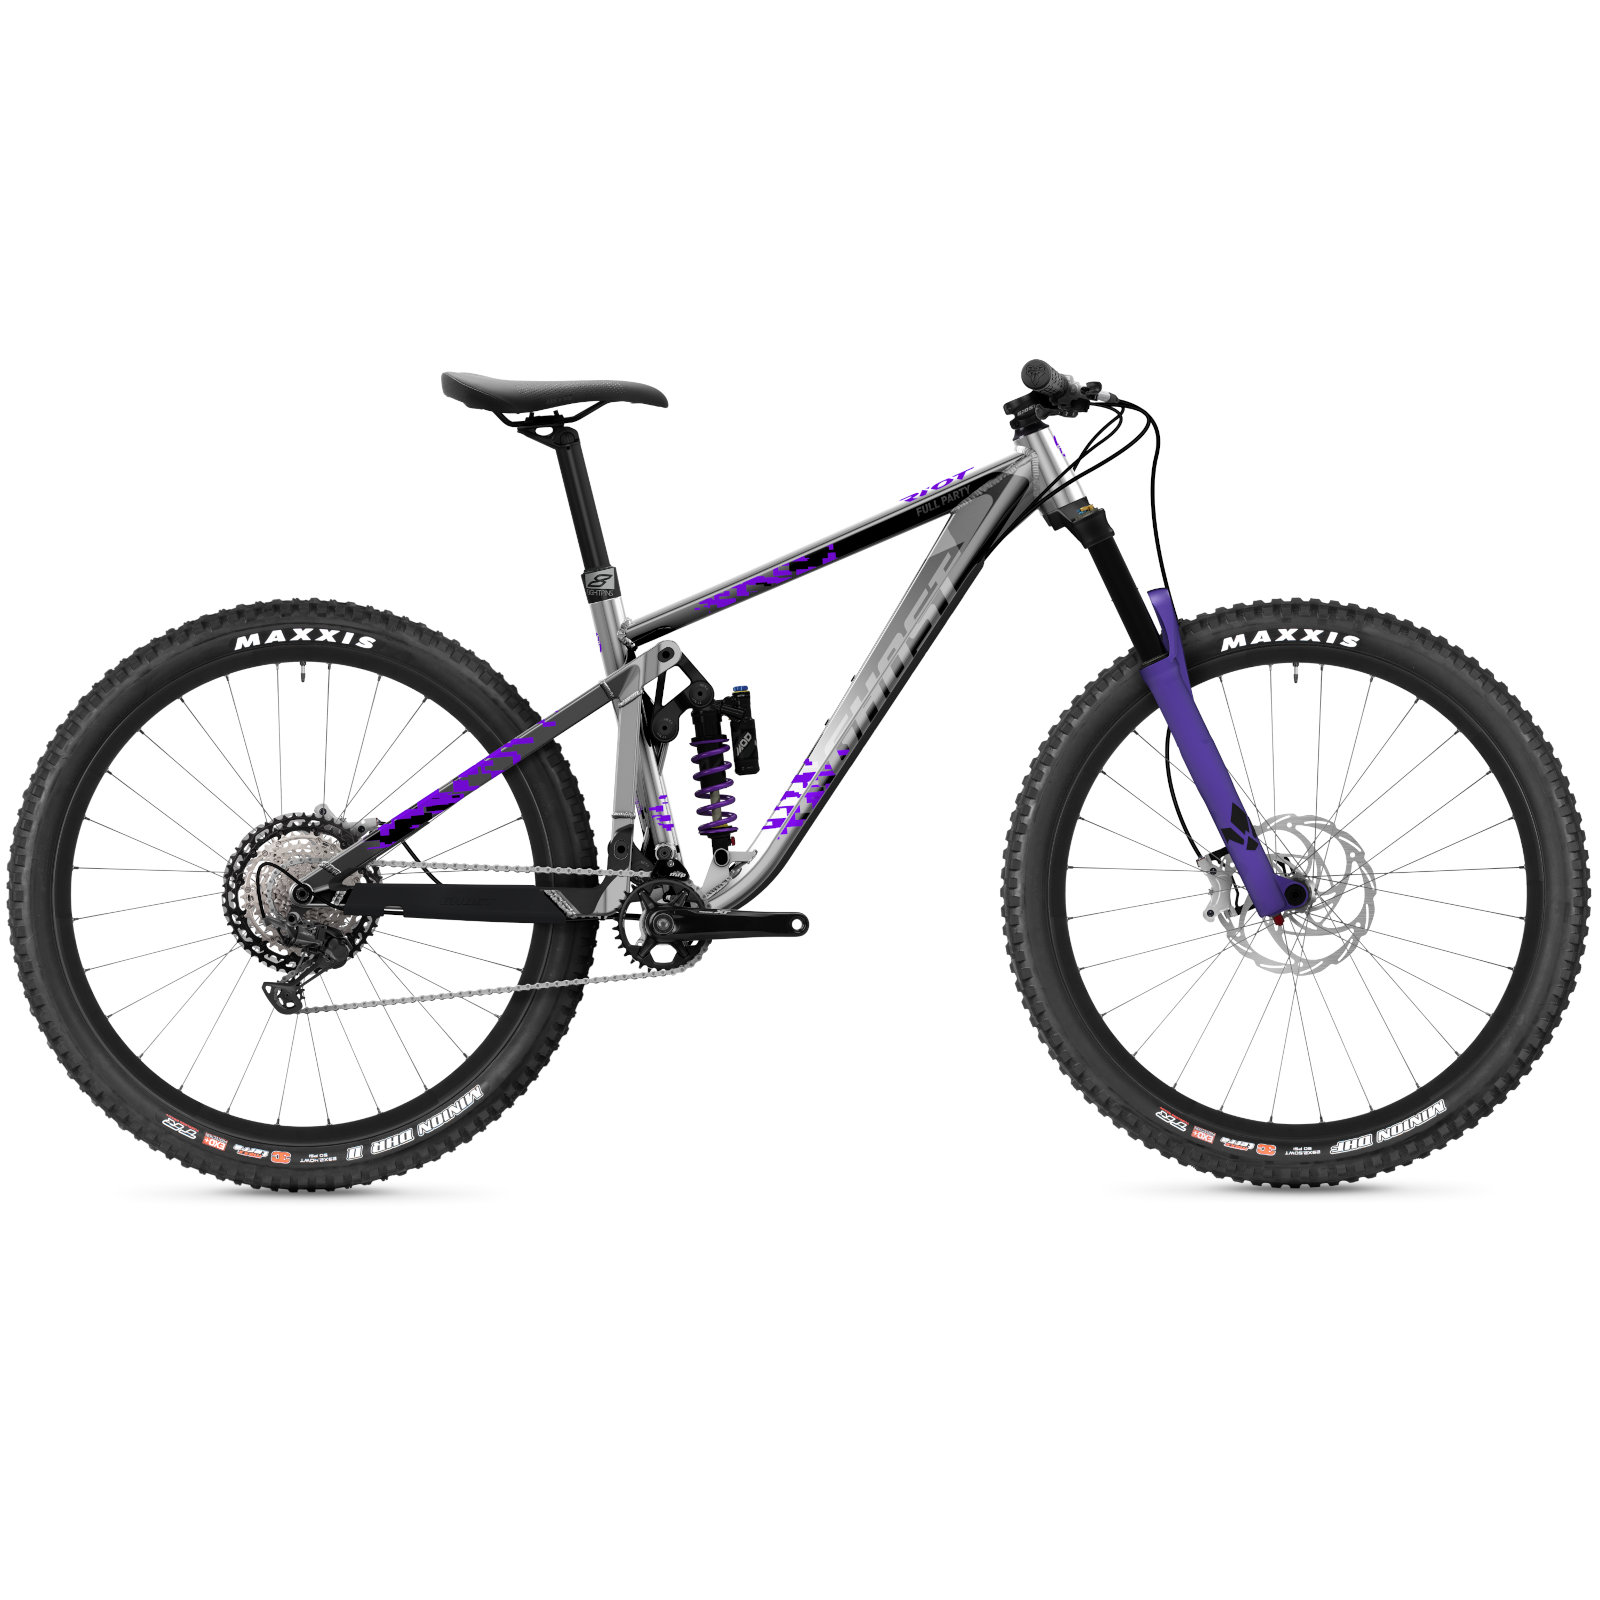 Productfoto van Ghost Riot AM Full Party - Mountainbike - 2022 - silver / glossy purple